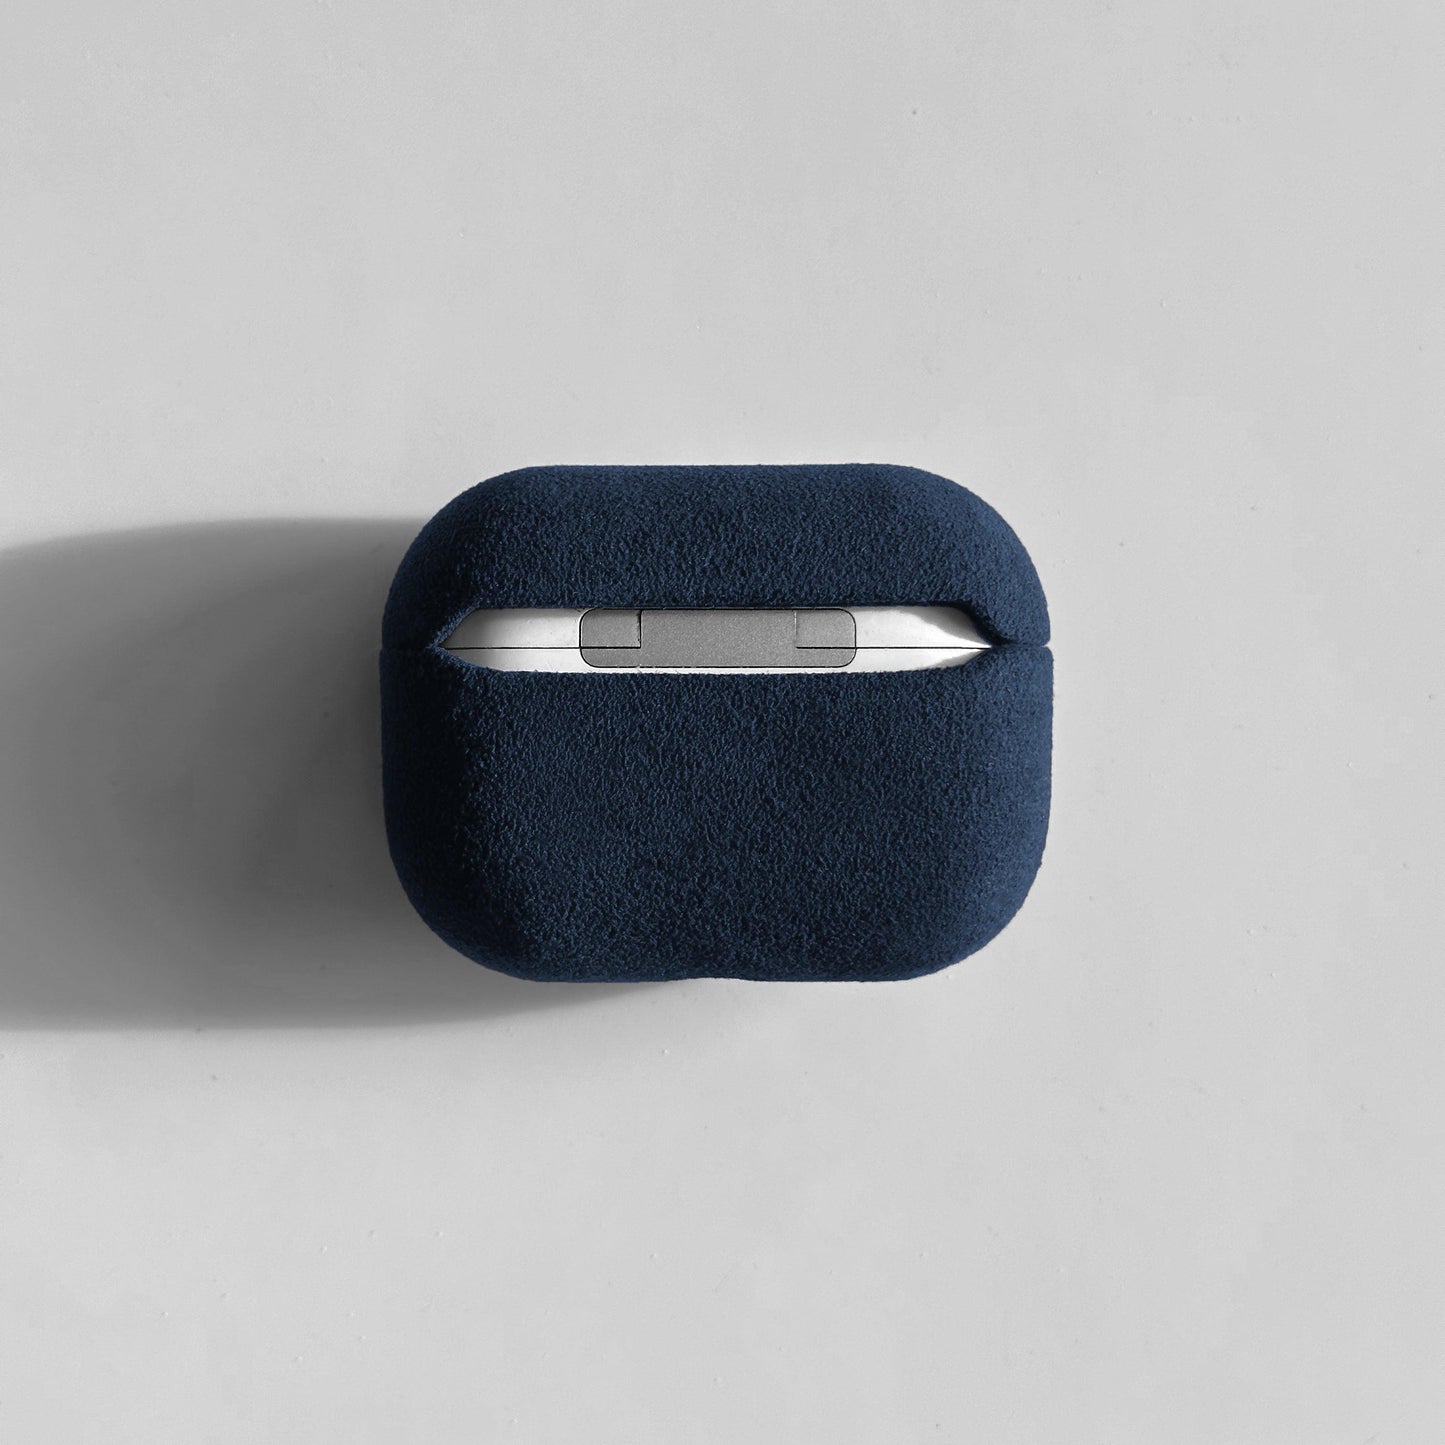 Alcantara Suede Leather iPhone Case and Accessories Collection - The AirPods Pro Case - Dark Blue - Luriax